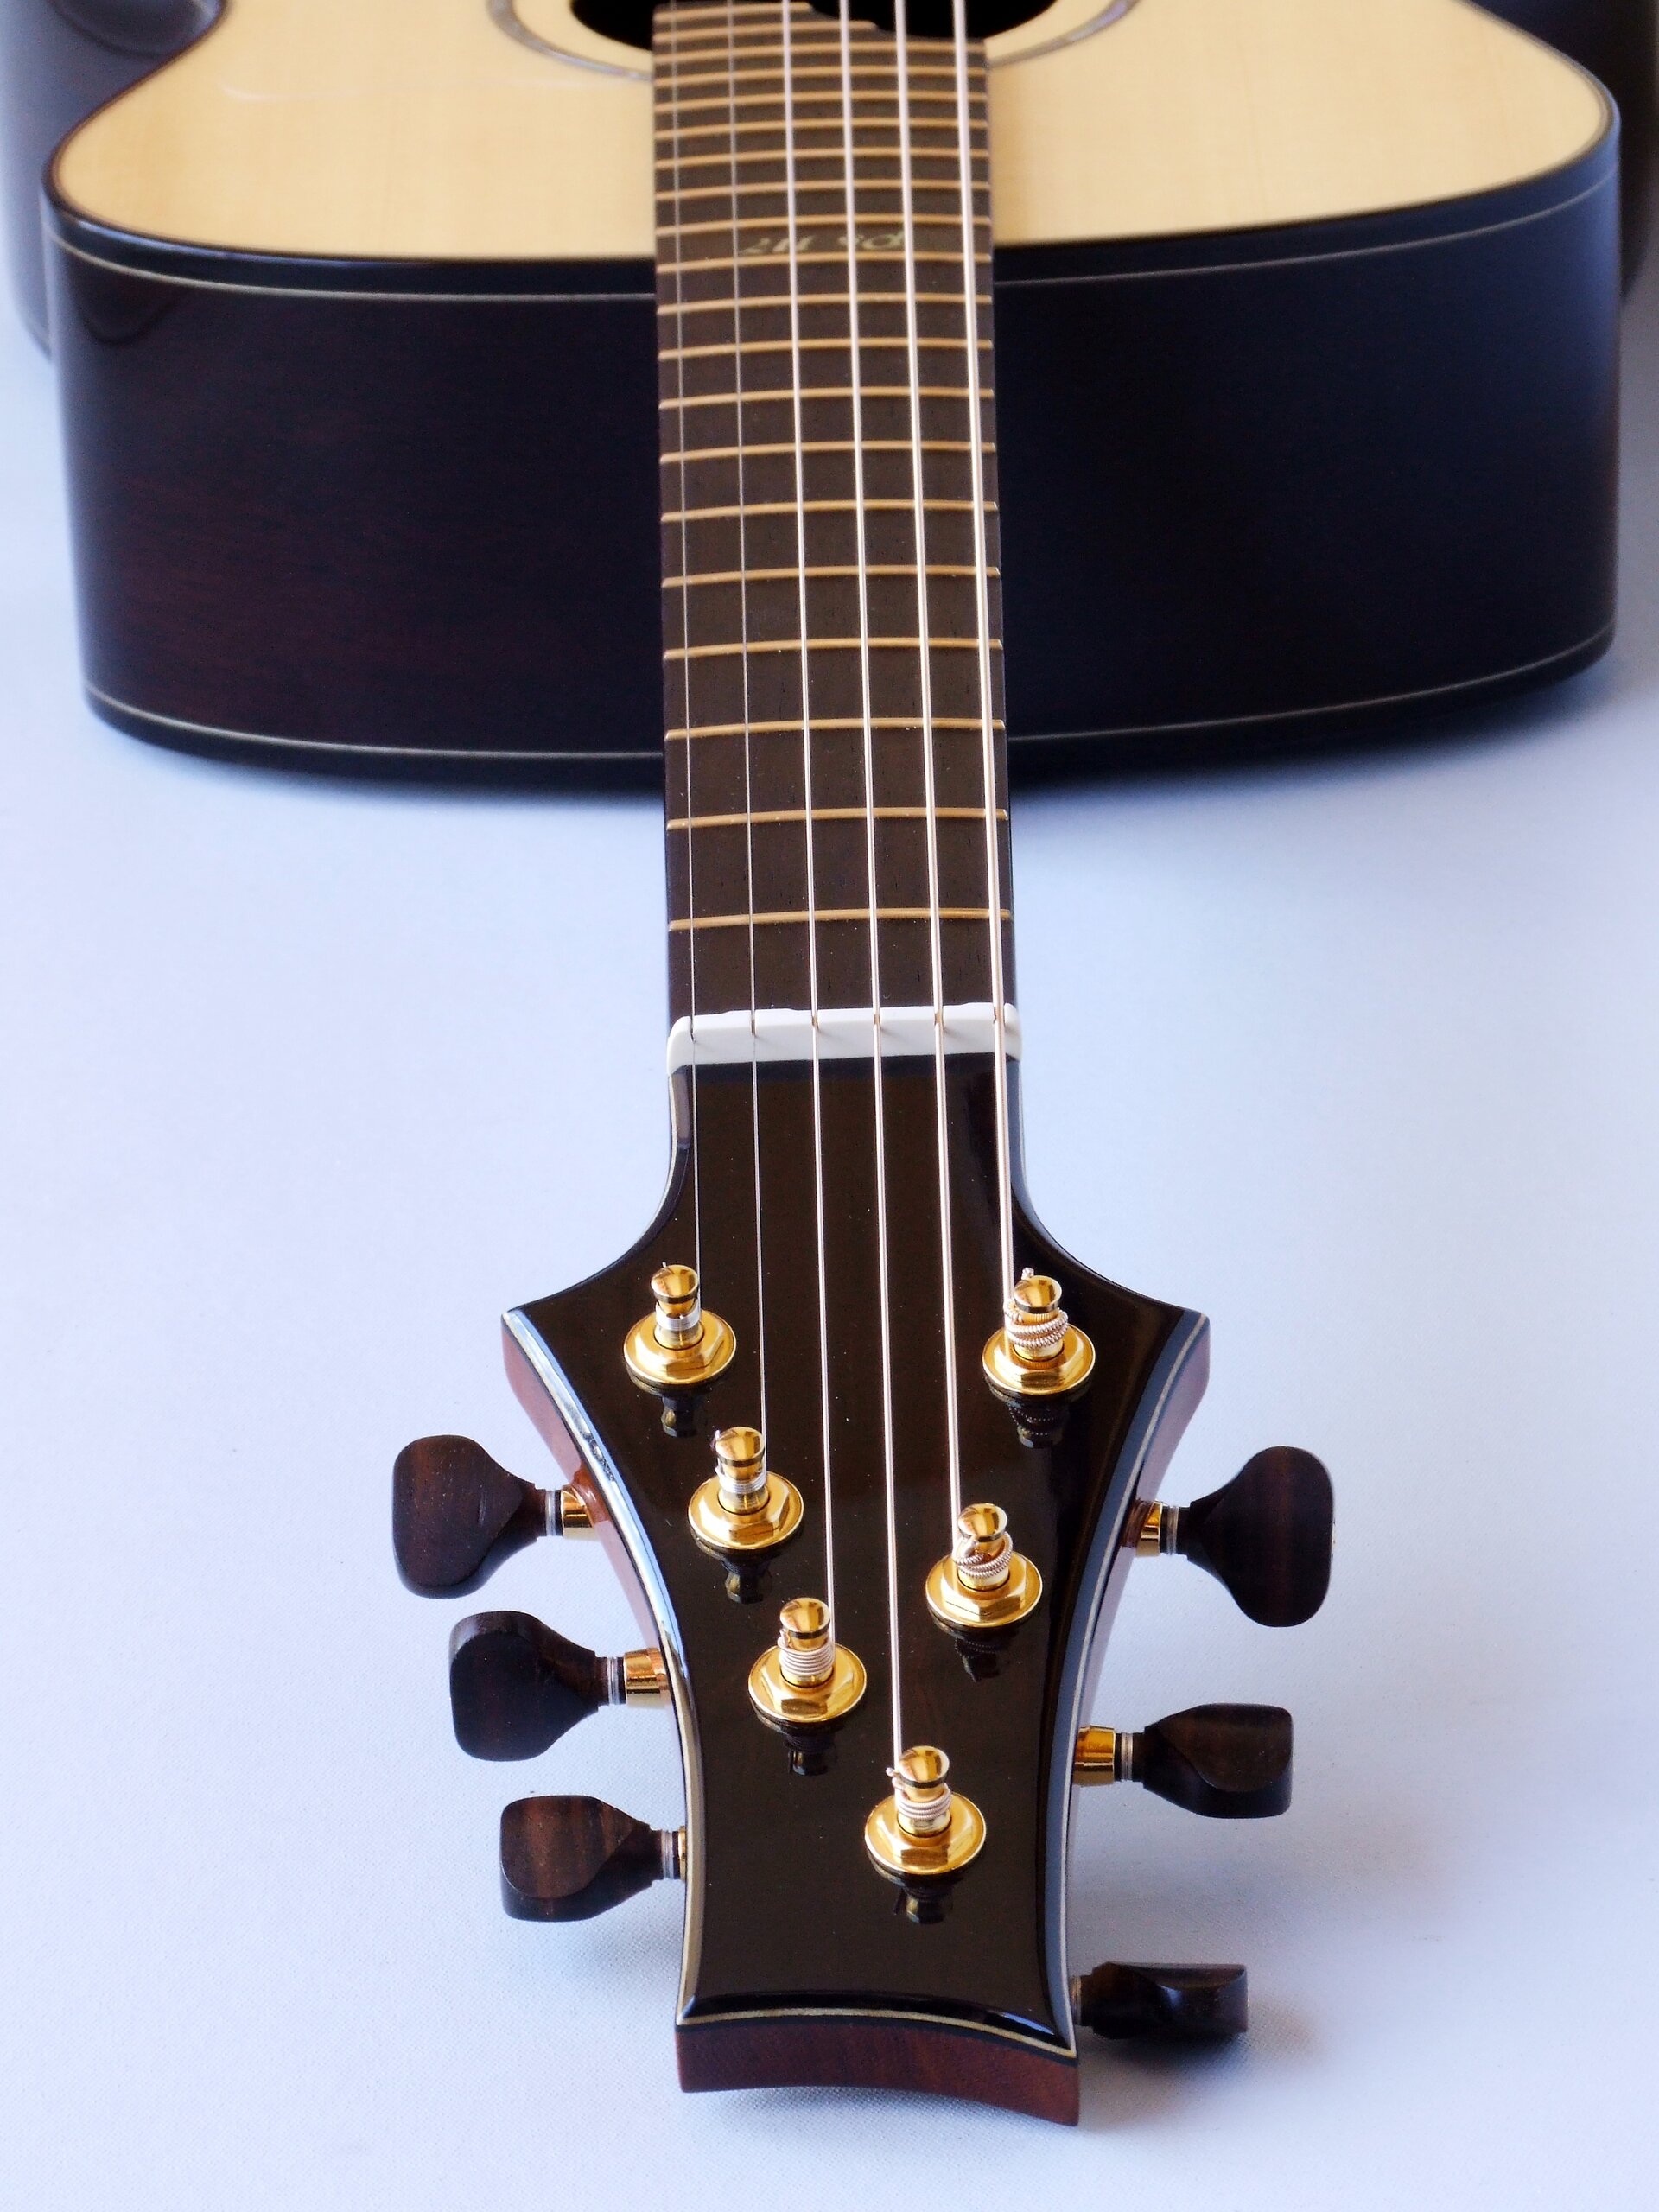 Custom guitars. View down the neck of a straight string pull guitar